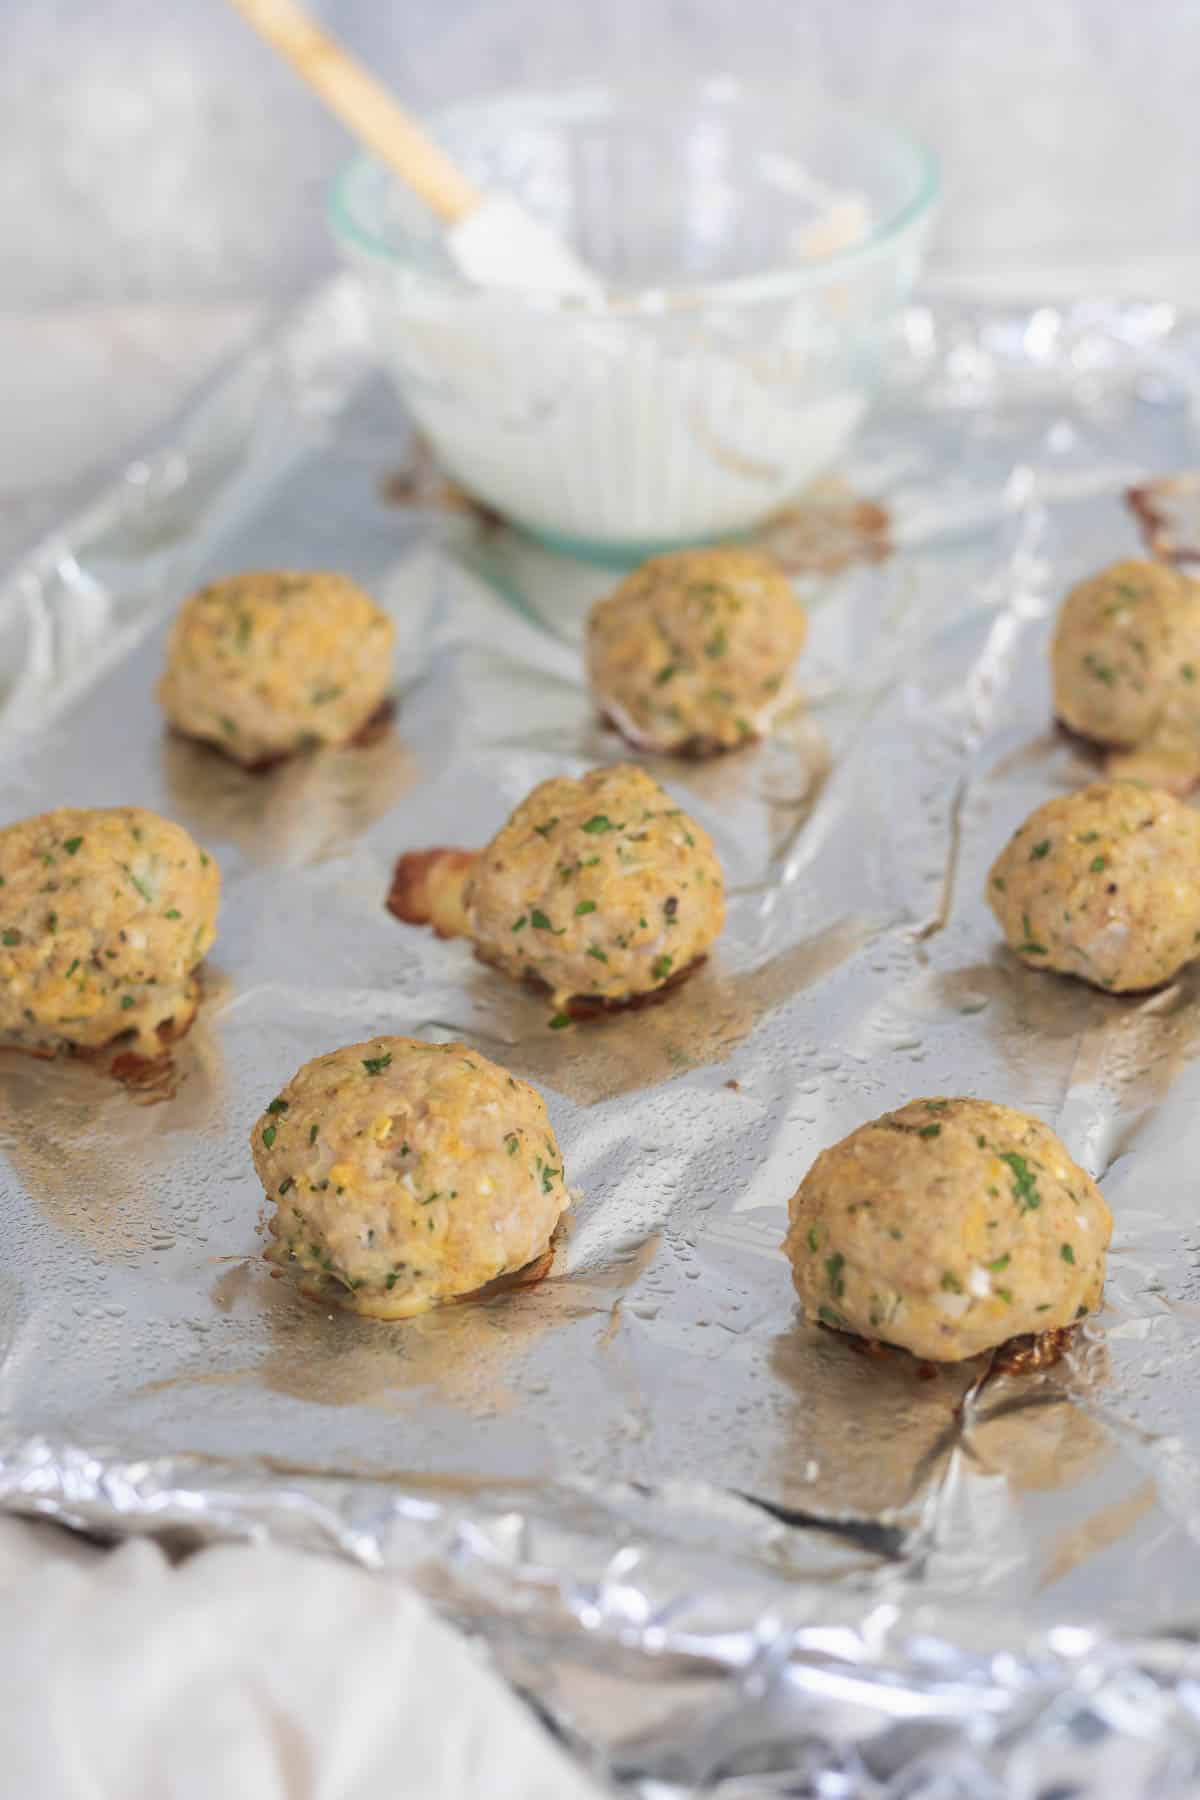 Cooked chicken meatballs on a foil baking sheet with yogurt sauce in the background.